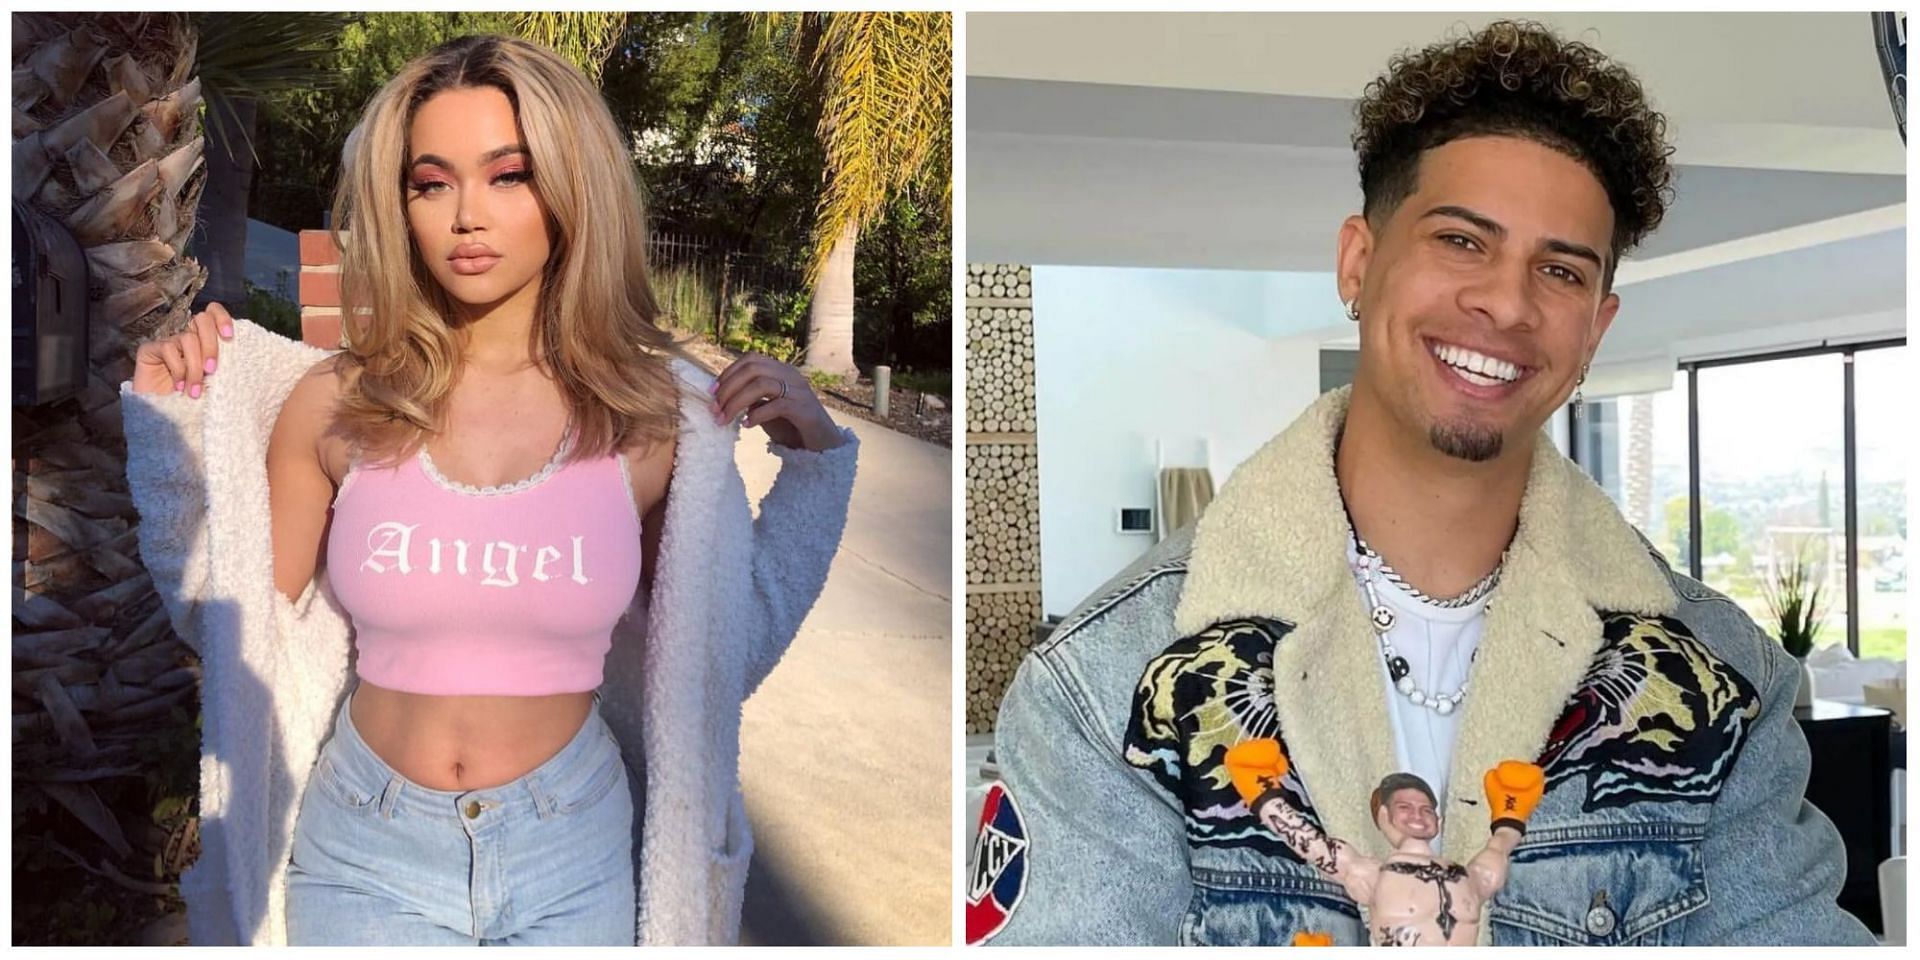 Shyla Walker accuses Austin McBroom of the ACE Family of posting pictures of her daughter without her consent and shares screenshots of their conversation. (Image via Instagram)